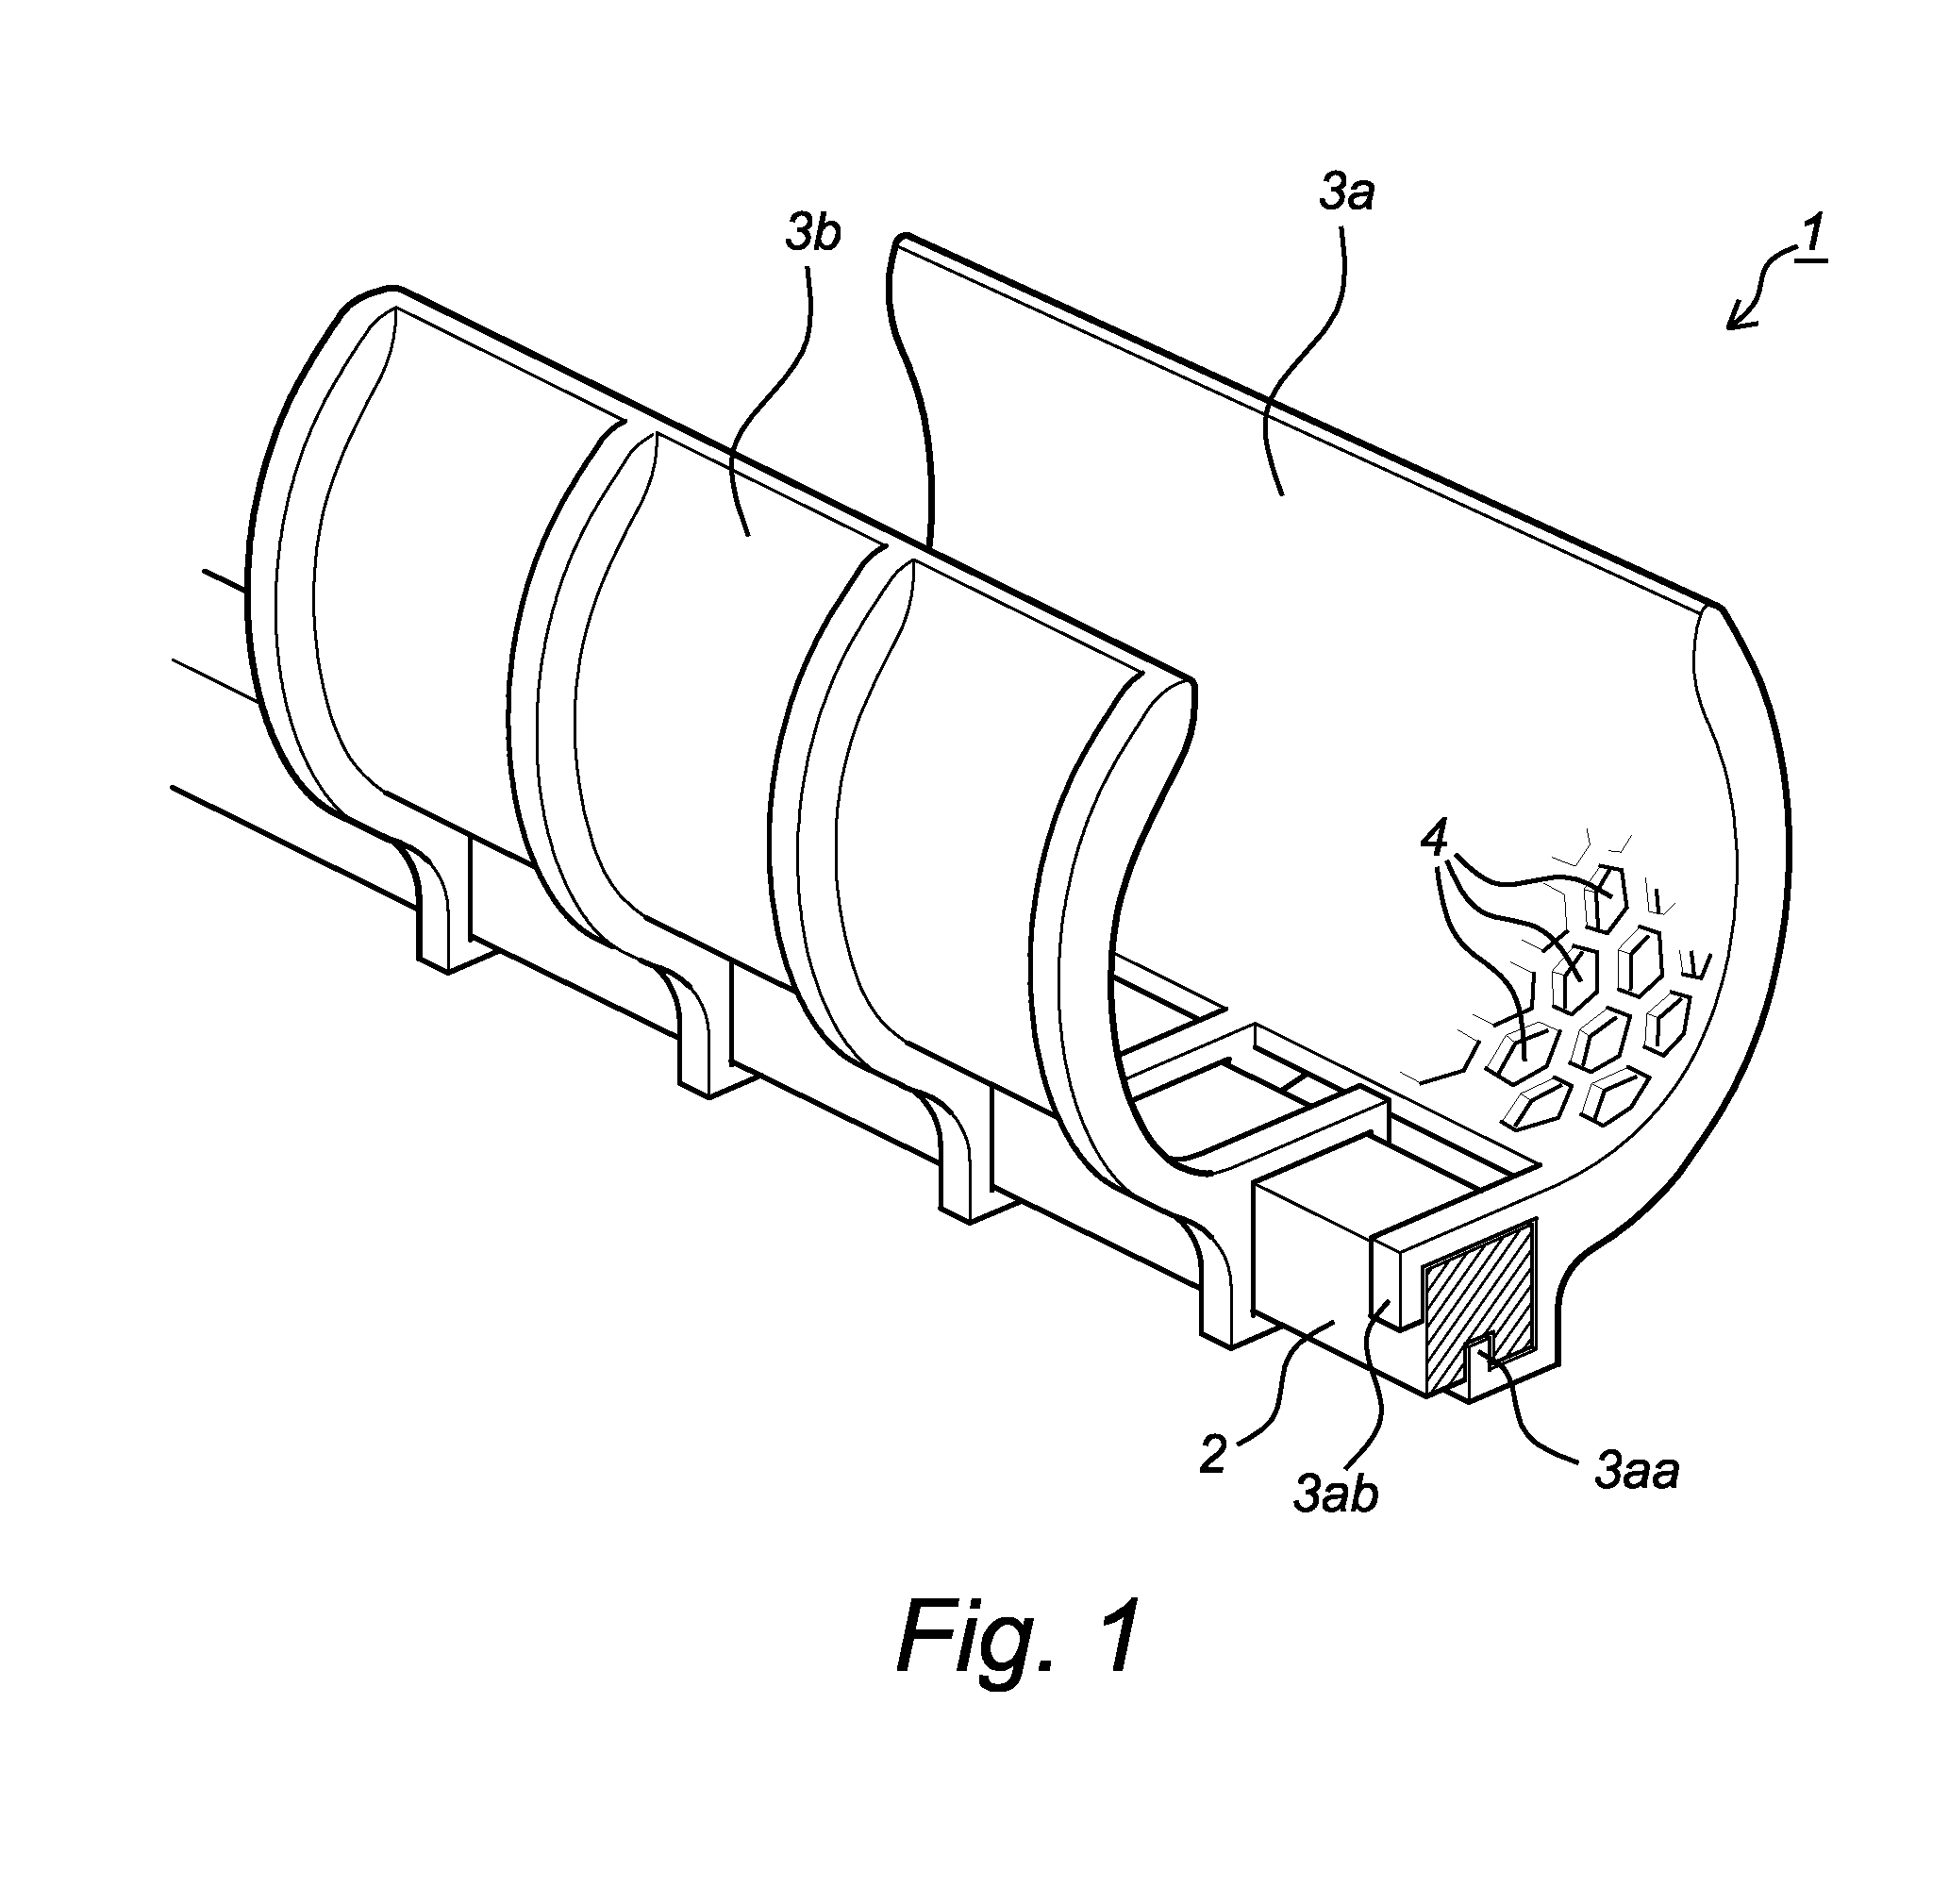 Product holder for holding food products